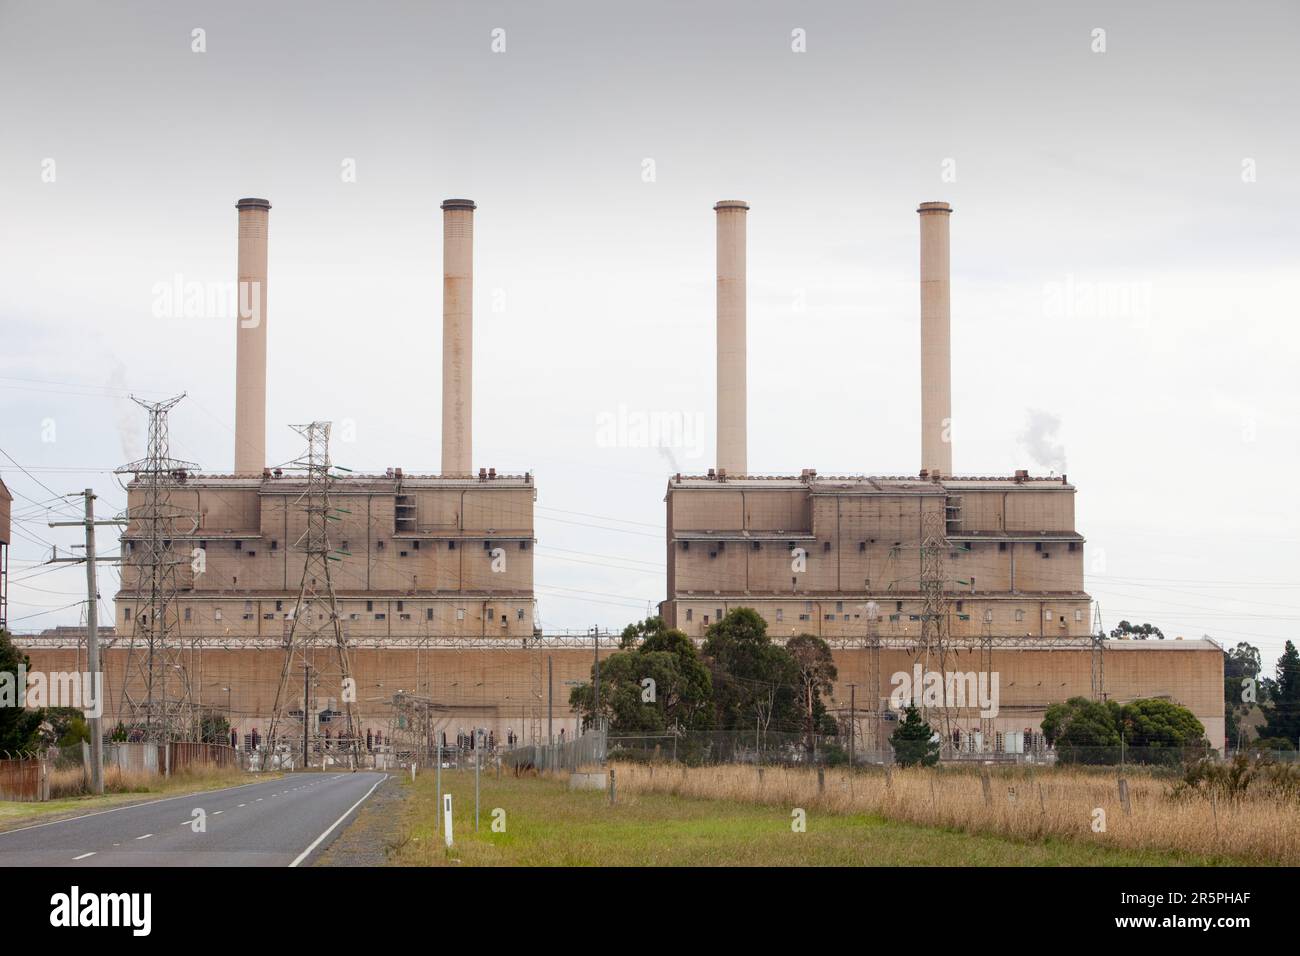 The Hazelwood coal fired power station in the Latrobe Valley, Victoria, Australia. It uses coal from a nearby open cast coal mine , as the Latrobe Valley has massive coal reserves Stock Photo